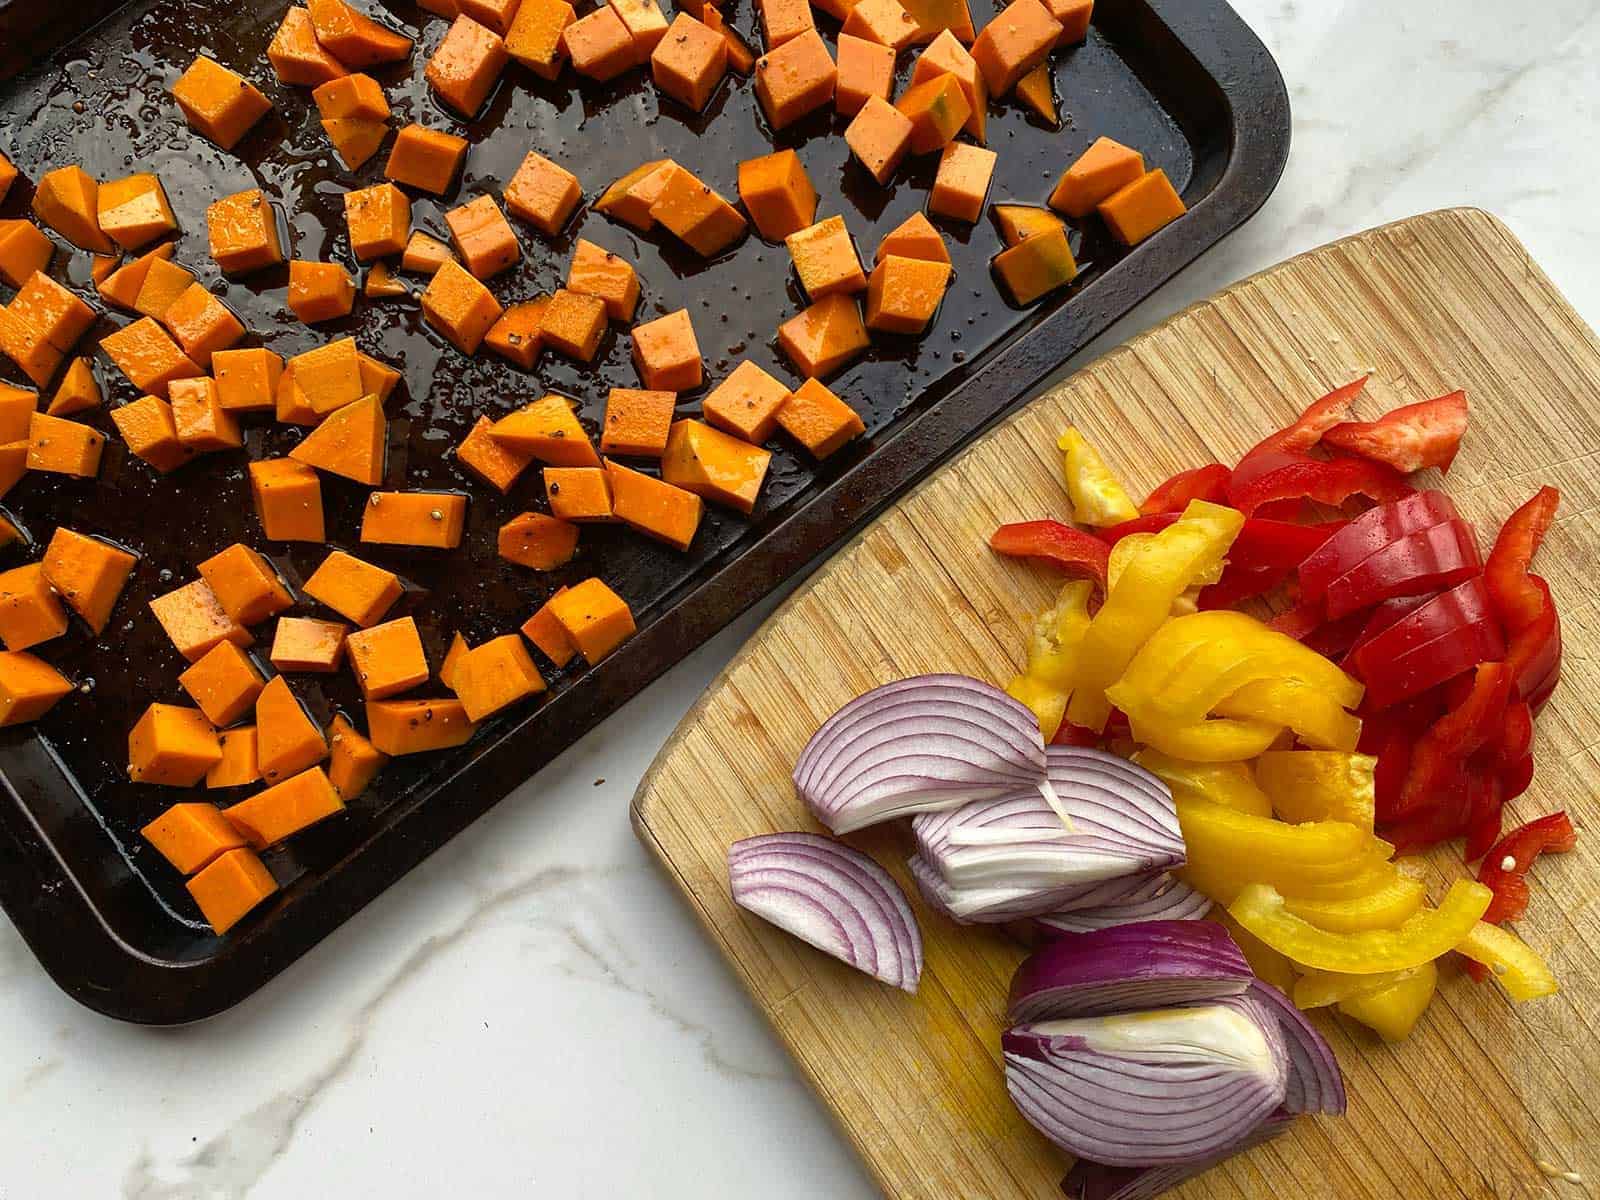 Pumpkin pieces on a baking tray next to sliced capsicum and red onion on a wooden chopping board.